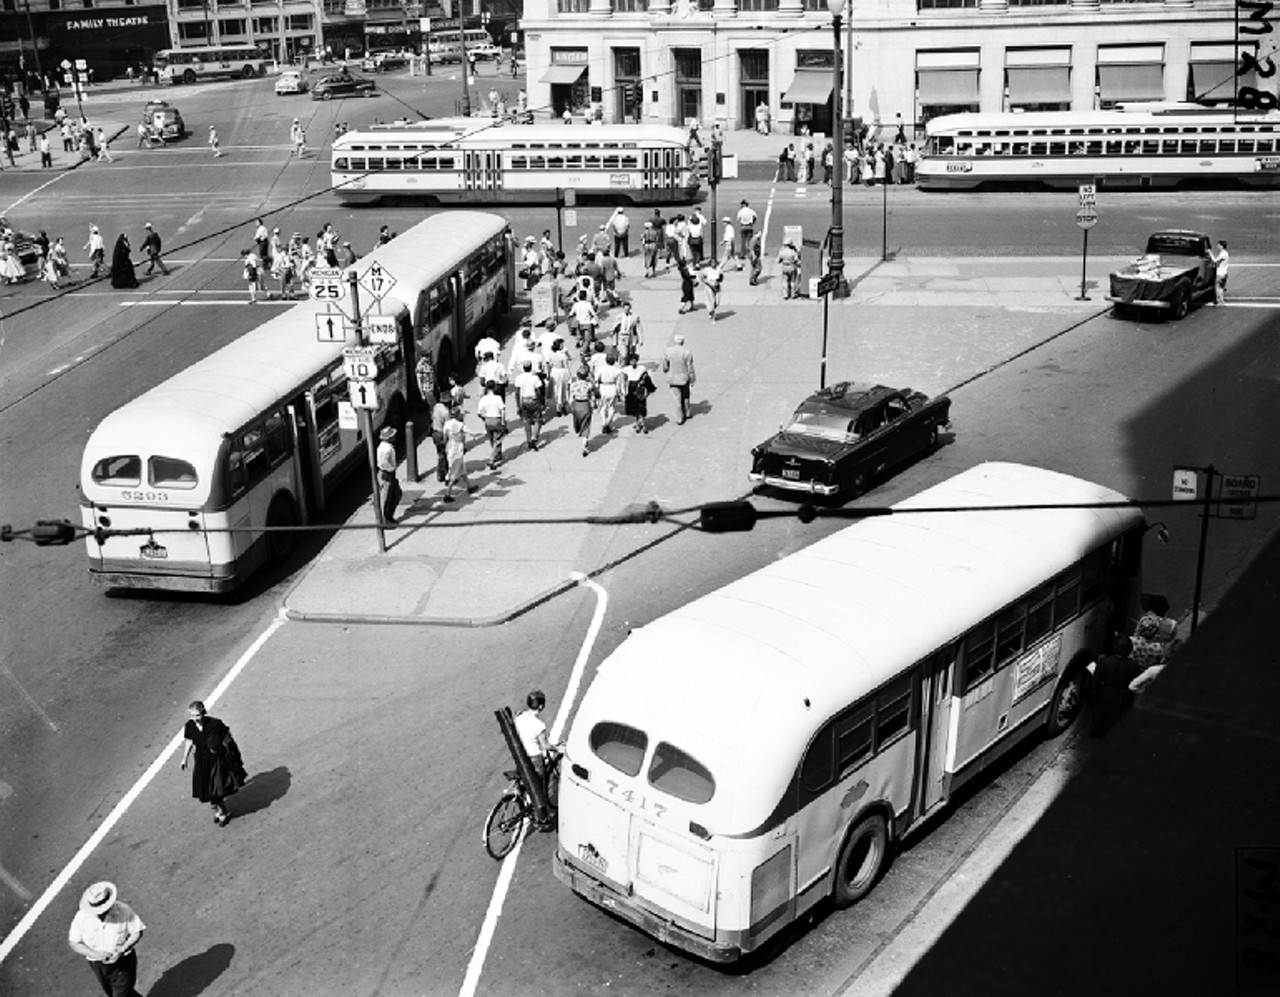 After the war, the push was on again to complete the system-wide conversion. Even though the city had bought a new fleet of PCC streetcars (seen in background), the DSR seemed determined to exploit every opportunity to make a rail line into a bus line. In 1951, three lines were switched abruptly to buses during a DSR strike. More closings followed until August 1955, when Mayor Albert Cobo, who promoted freeway construction as the way of the future, urged City Council to sell the city's recently purchased fleet of modern streetcars to Mexico City.